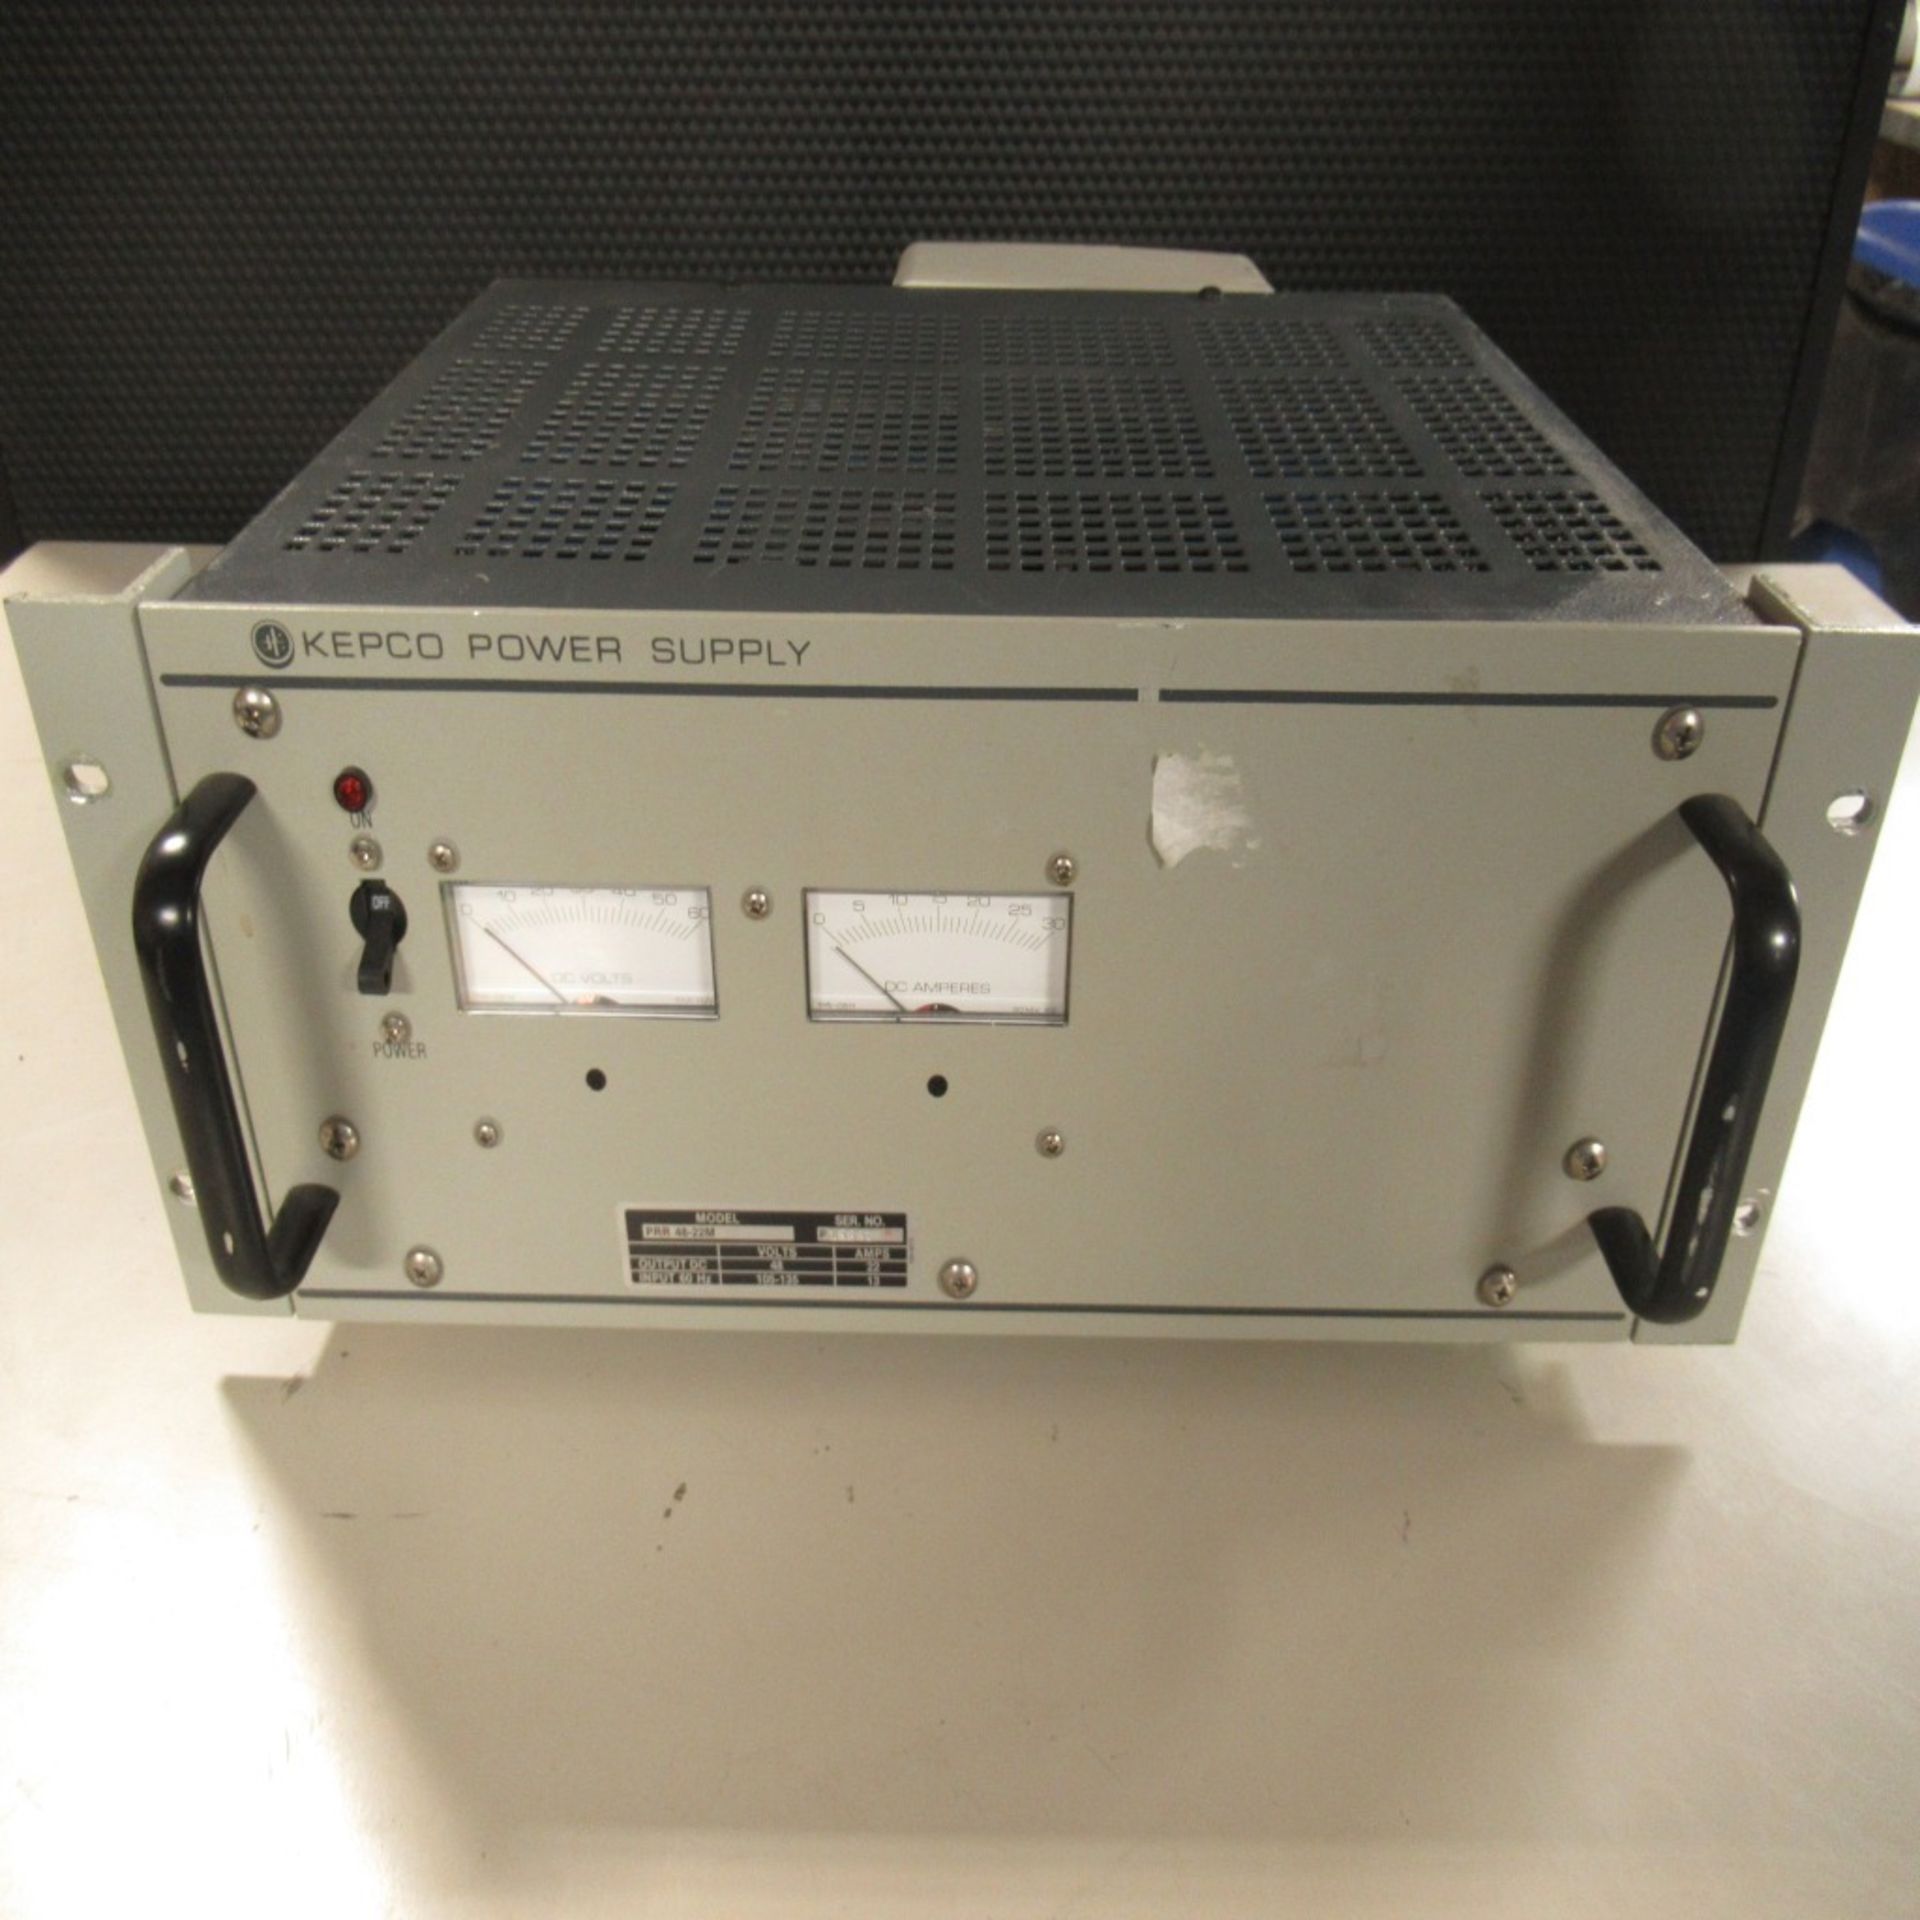 PHOTON SNAP SHOT MODEL 6000 *POWERS ON* NO SCREEN DISPLAY; FARNELL AP20-80 REGULATED POWER SUPPLY * - Image 12 of 222